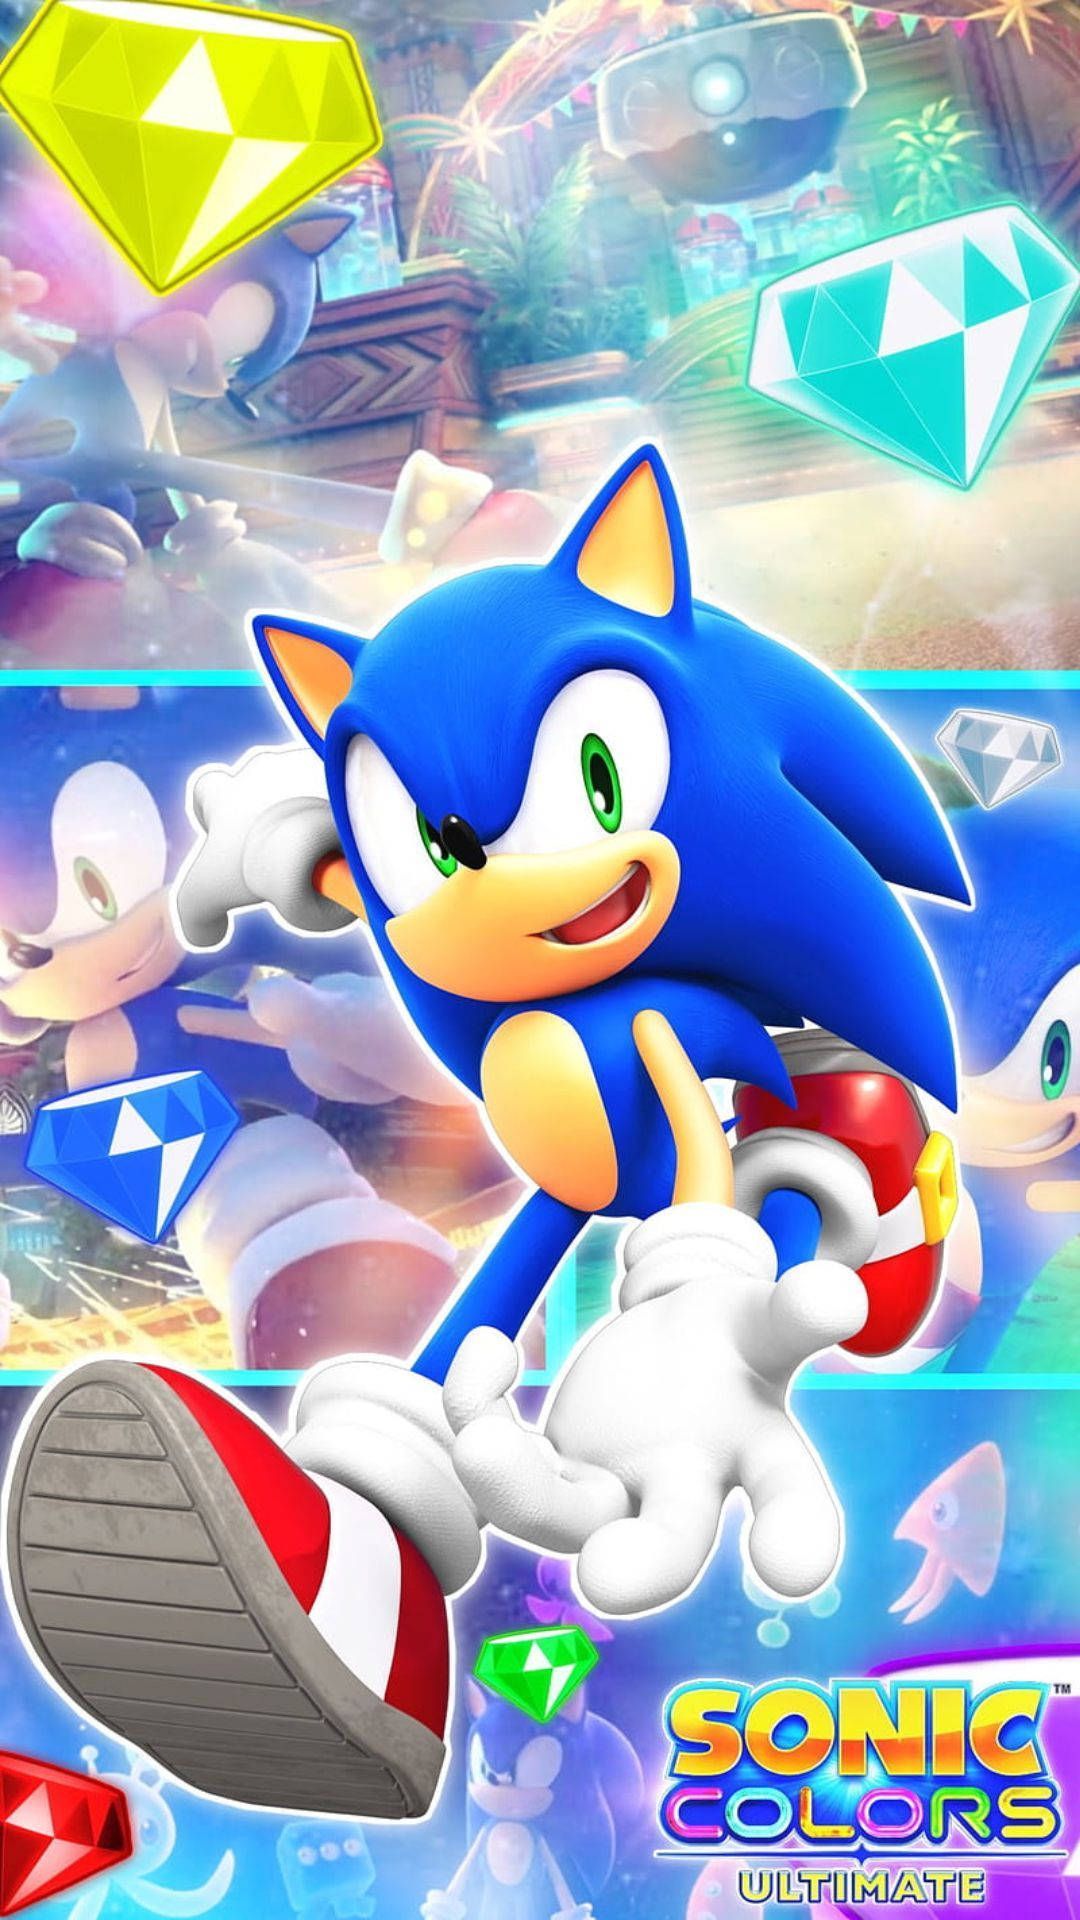 Sonic Colors Ultimate iPhone Wallpaper with high-resolution 1080x1920 pixel. You can use this wallpaper for your iPhone 5, 6, 7, 8, X, XS, XR backgrounds, Mobile Screensaver, or iPad Lock Screen - Sonic